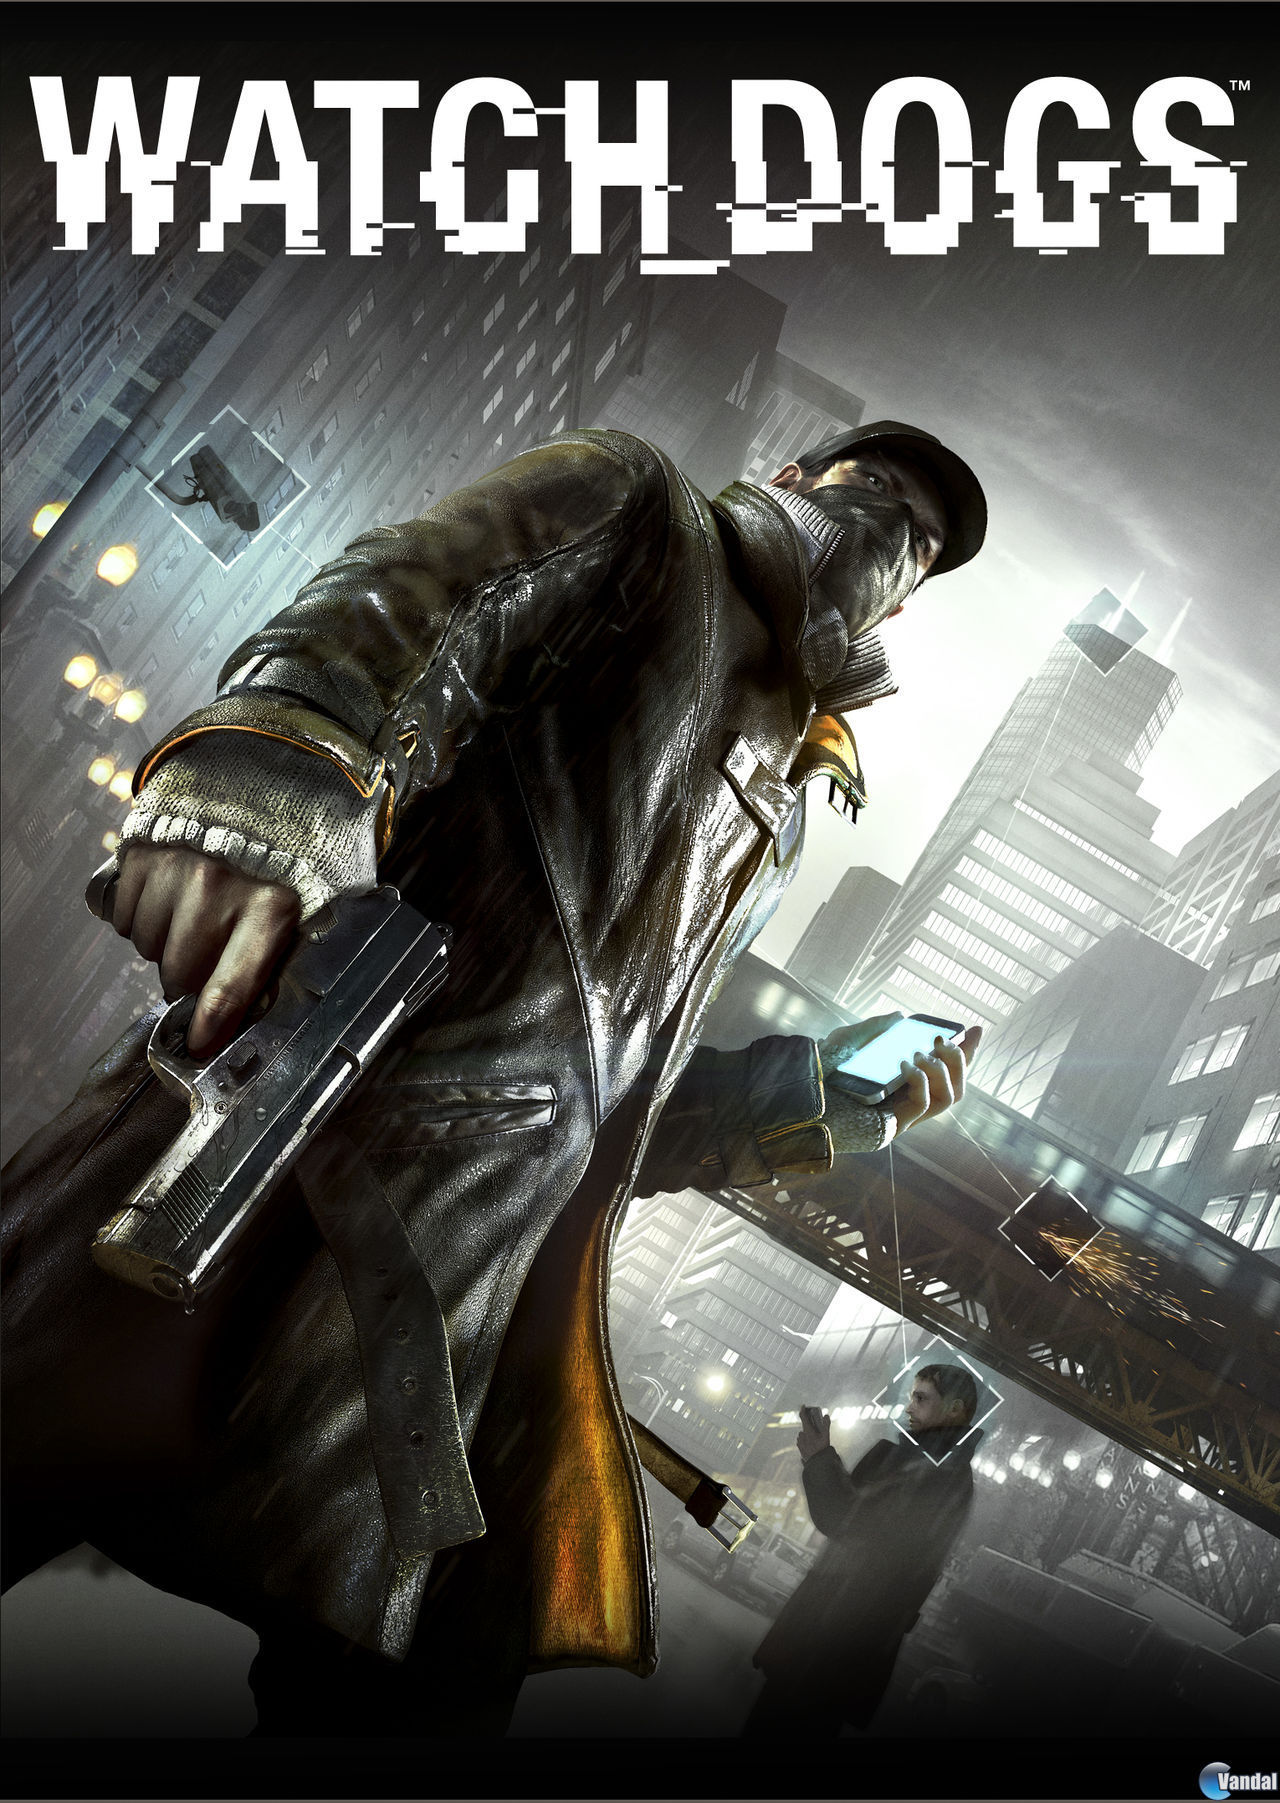 watch dogs, games Full HD